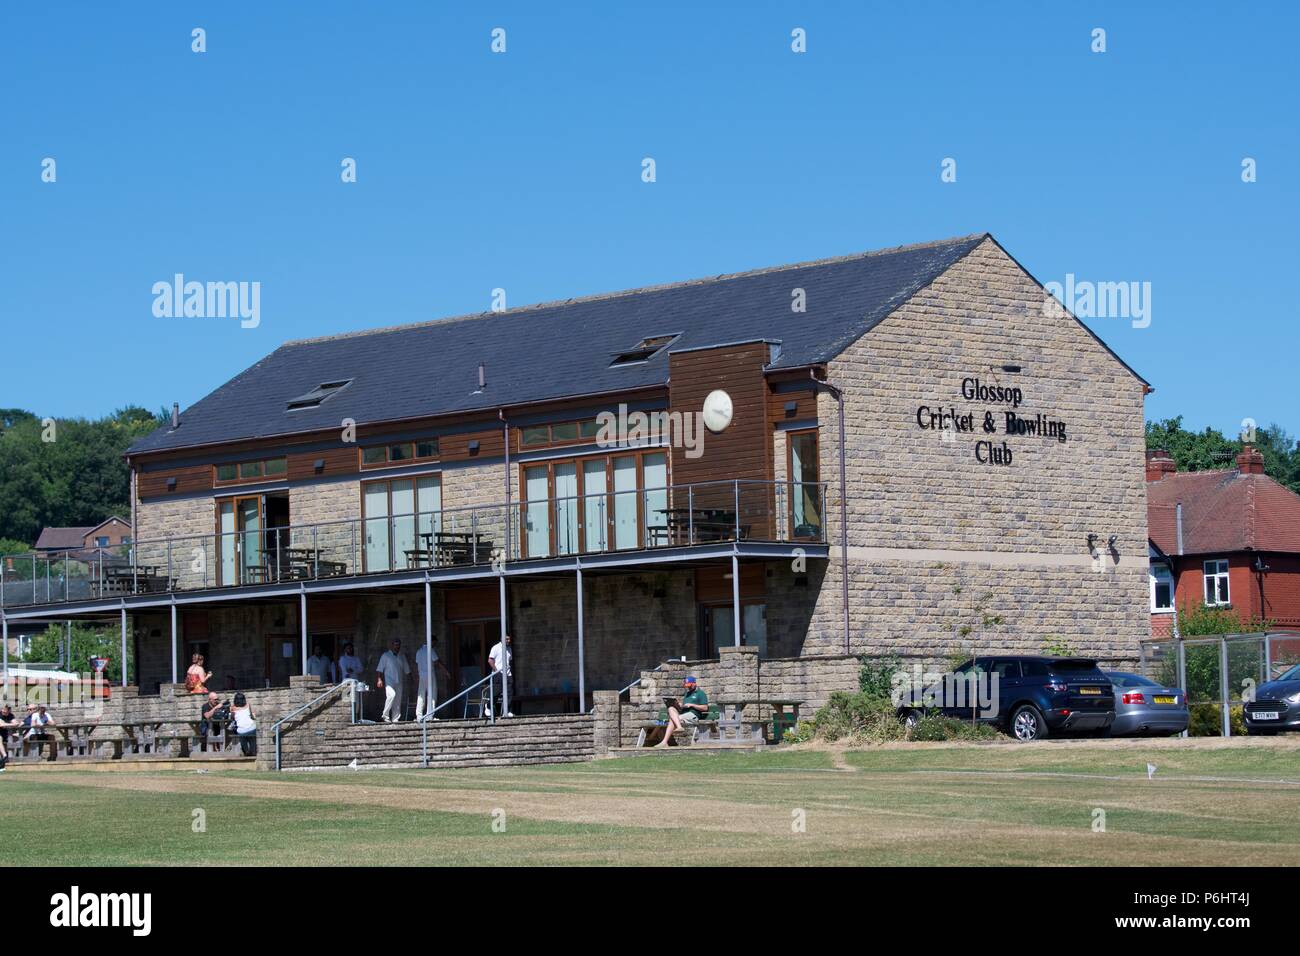 Glossop Cricket and Bowling Club pavilion Stock Photo